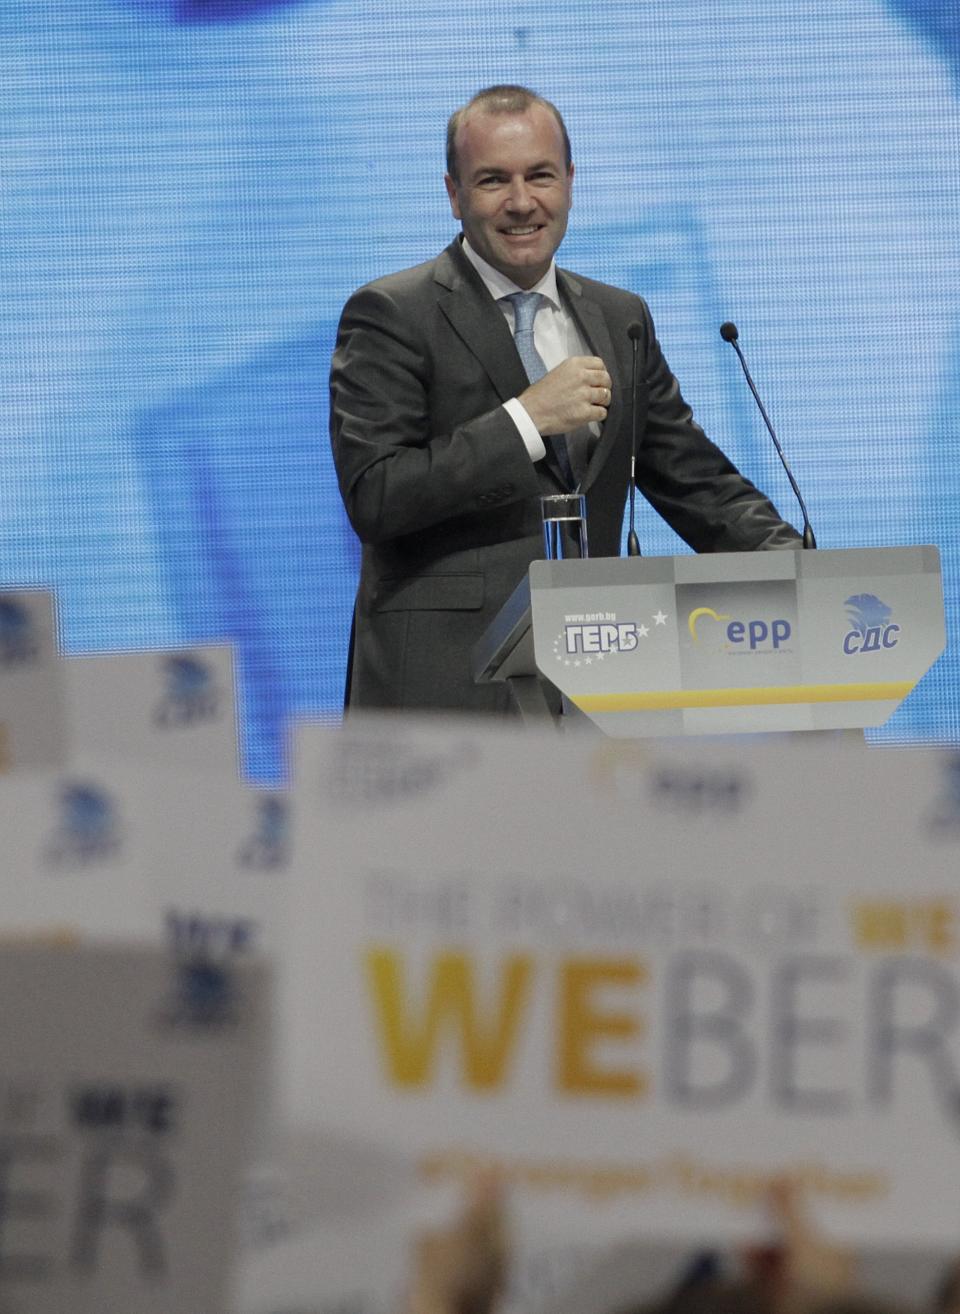 Germany's Manfred Weber of the European People's Party addresses the audience at the Bulgaria's GERB ruling Party rally in Sofia, Bulgaria, Sunday, May 19, 2019. The rally comes days before more than 400 million Europeans from 28 countries will head to the polls to choose lawmakers to represent them at the European Parliament for the next five years. (AP Photo/Valentina Petrova)